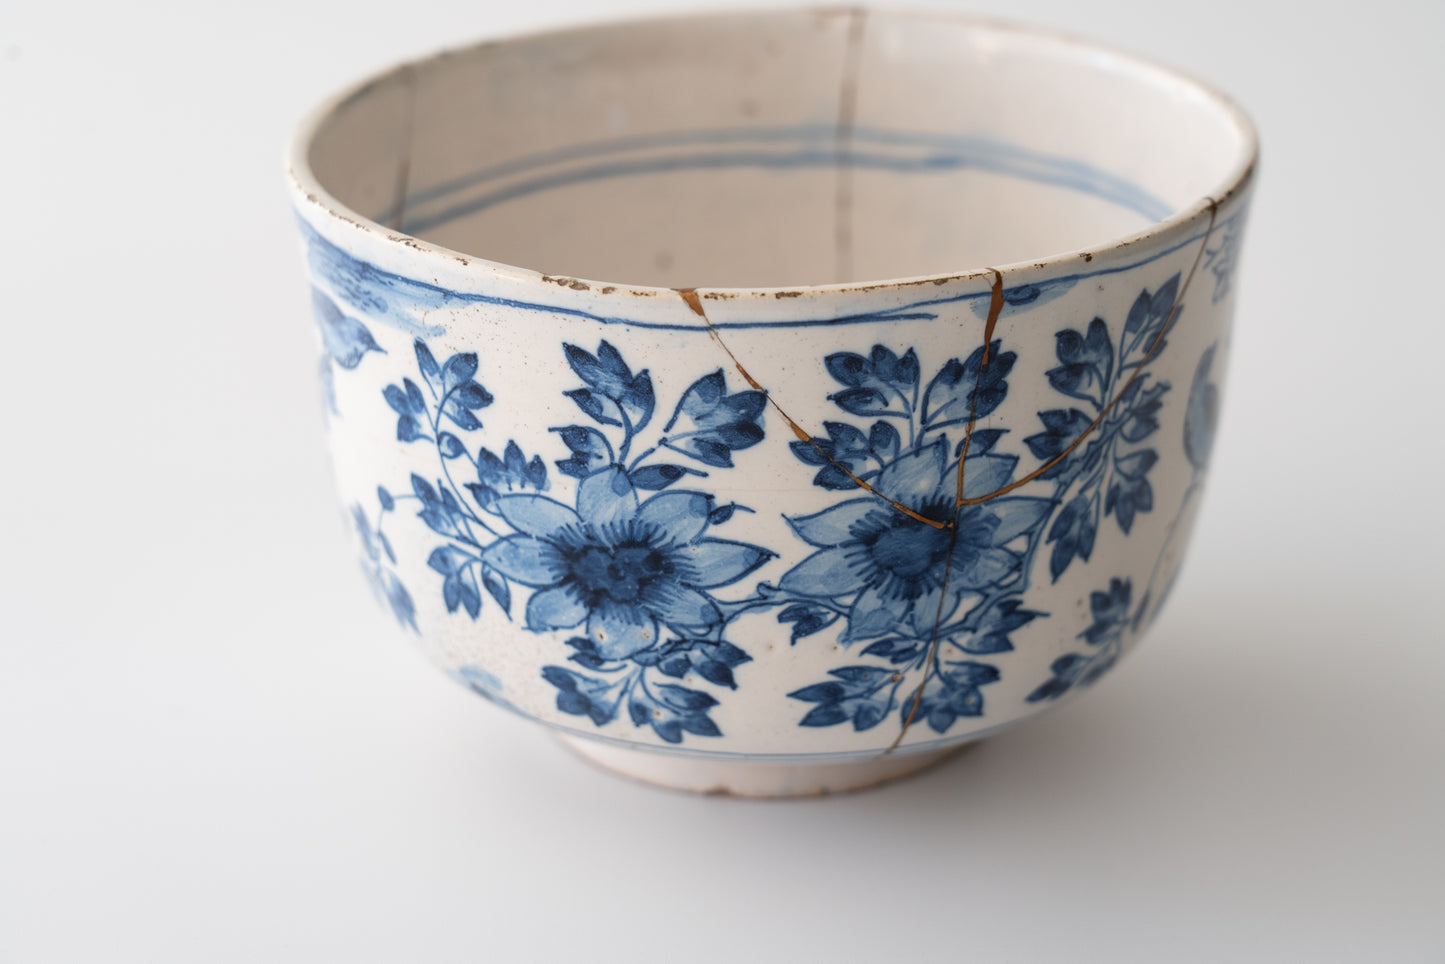 Bowl with bird and flower design